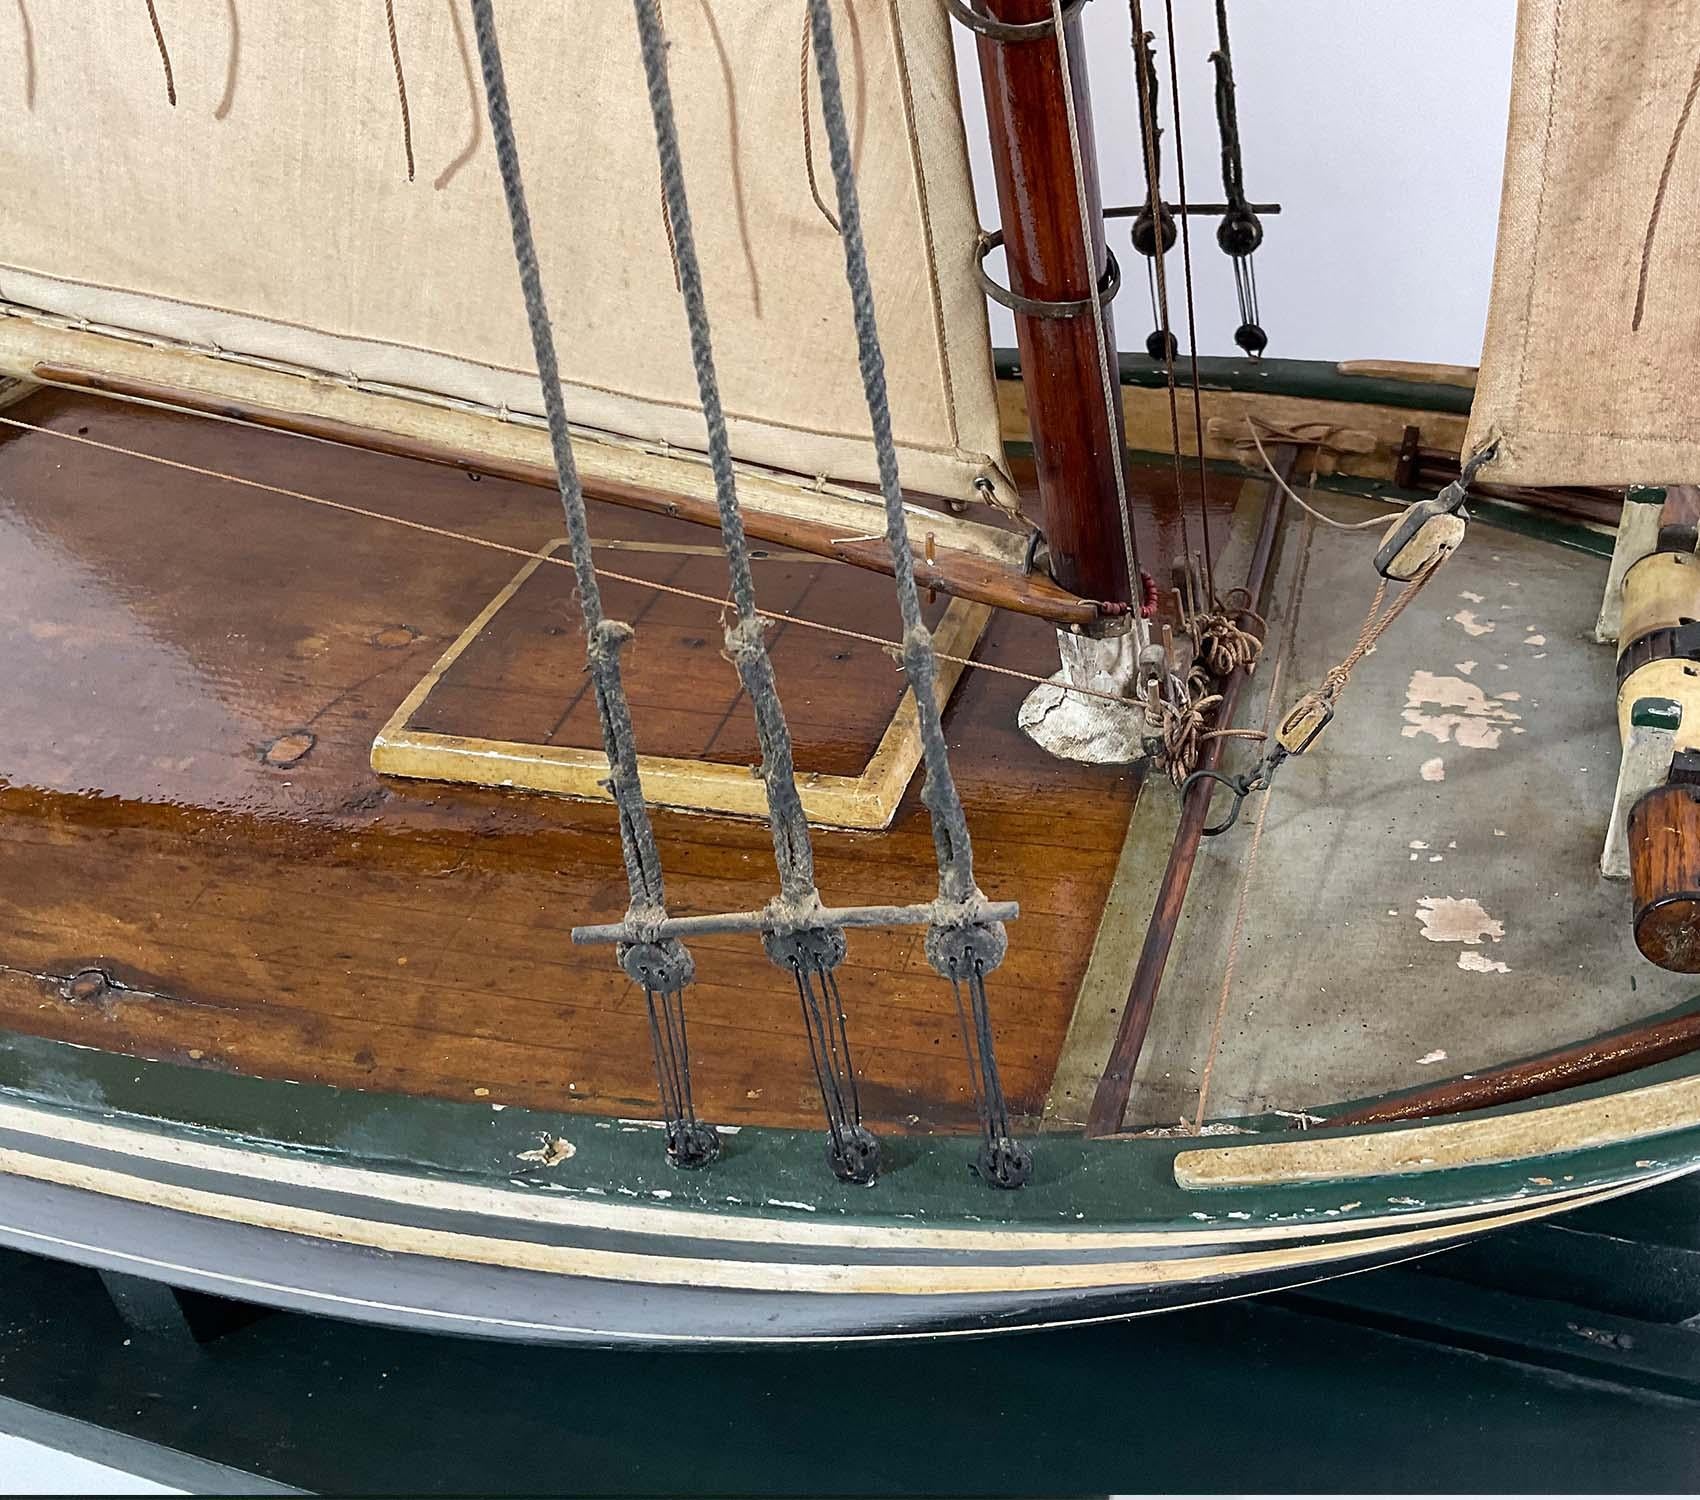 Late 19th Century Model of the Oyster Sloop Fanny Fern of Quincy Mass